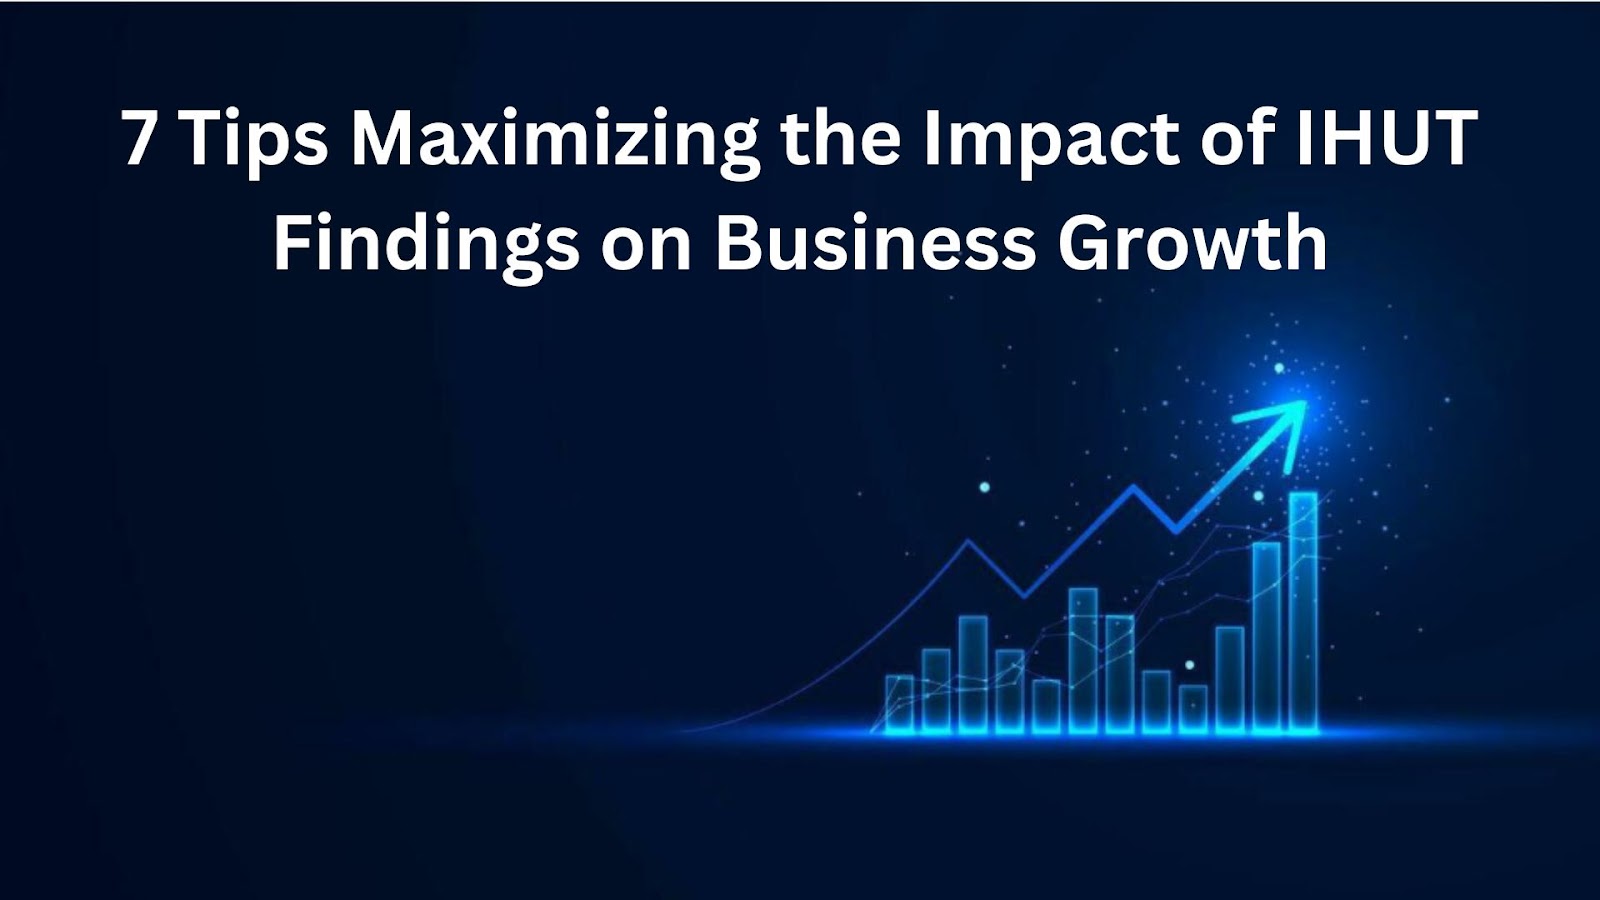 7 Tips Maximizing the Impact of IHUT Findings on Business Growth